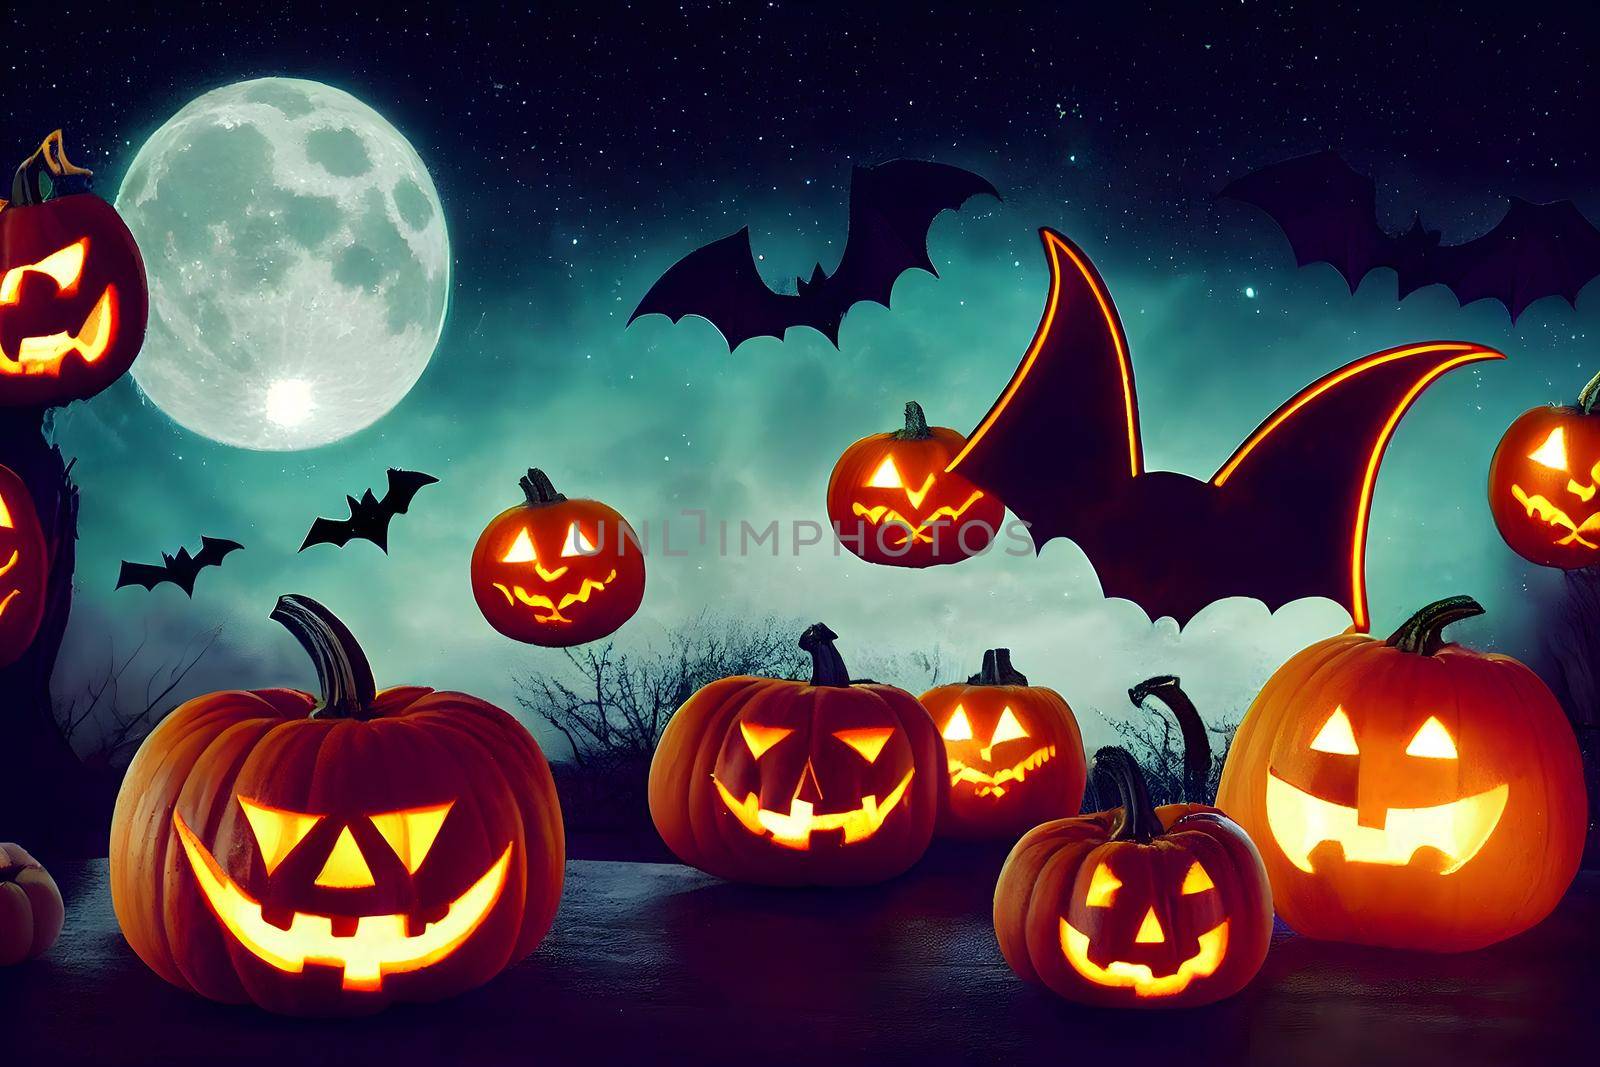 halloween background, bats, pumpkins, full moon and stars at night, neural network generated art. Digitally generated image. Not based on any actual scene or pattern.